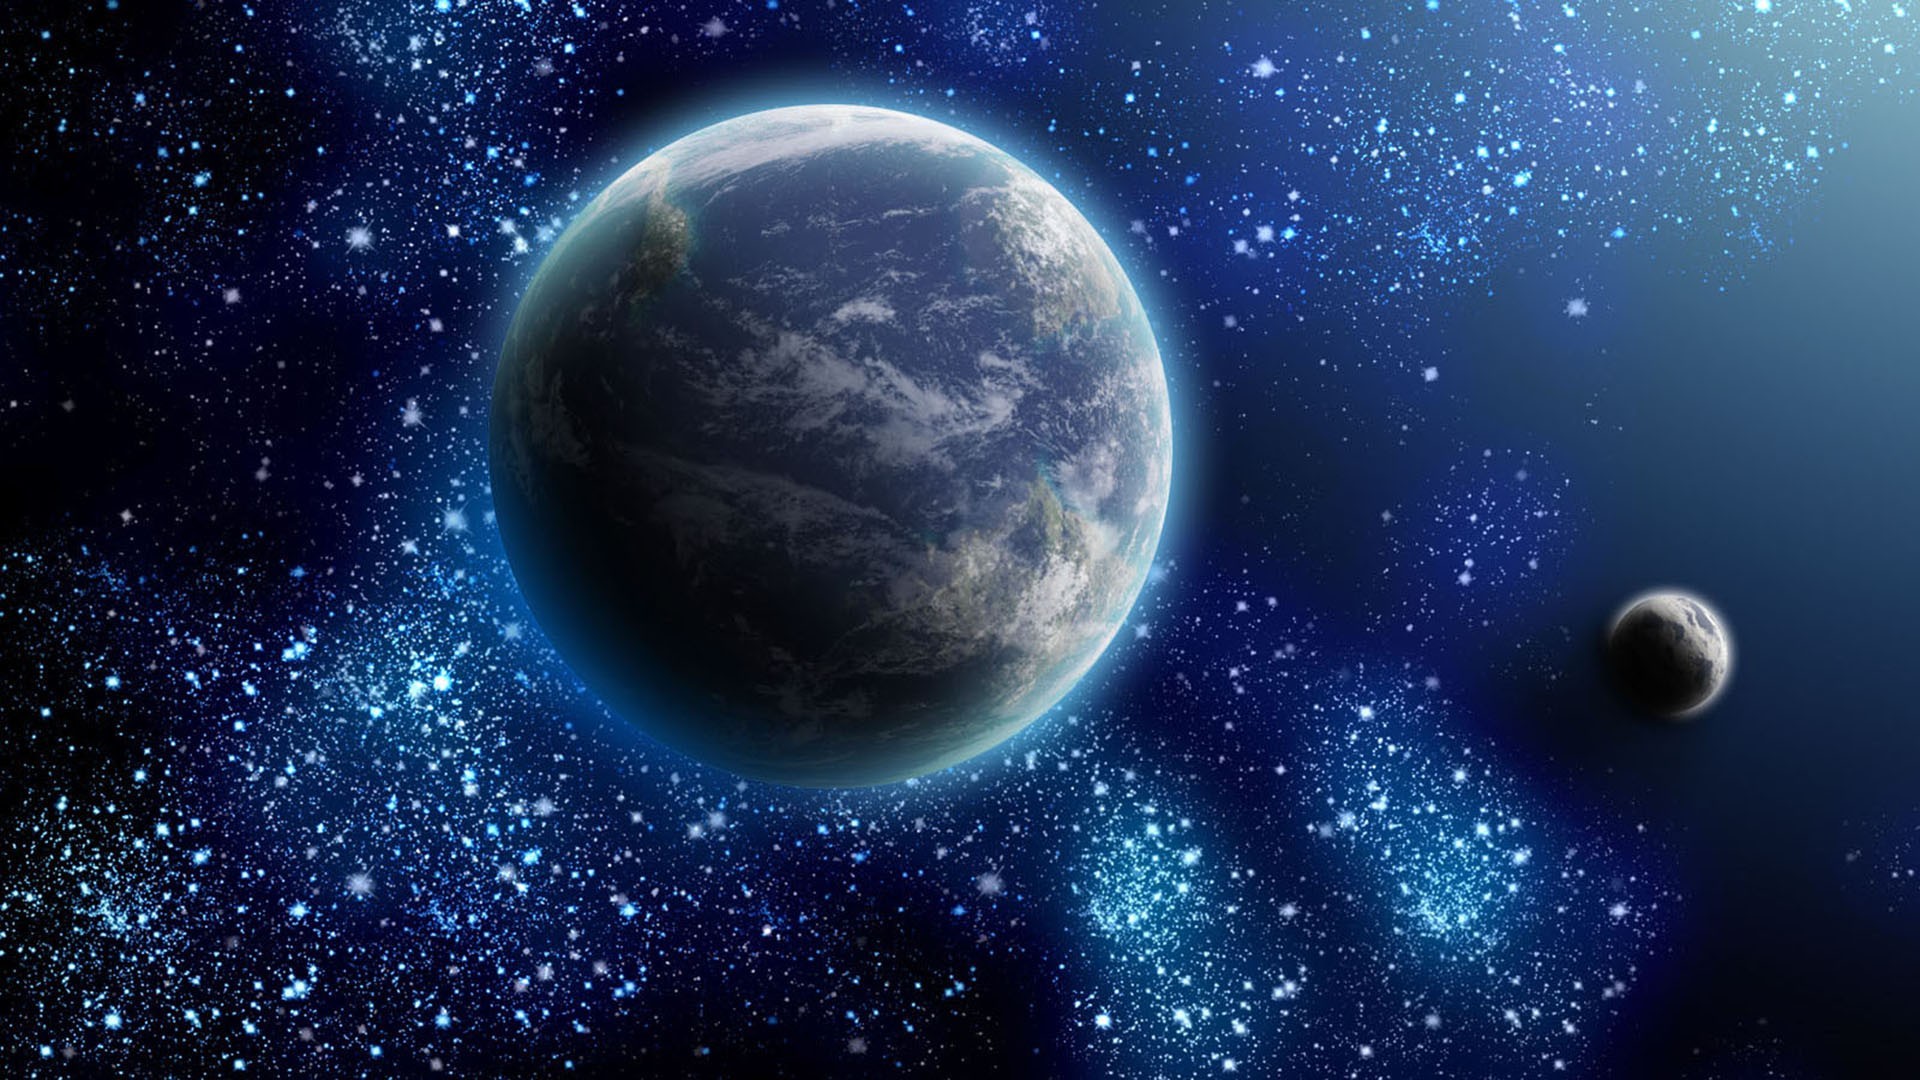 Earth and moon surrounded by stars wallpaper 3515